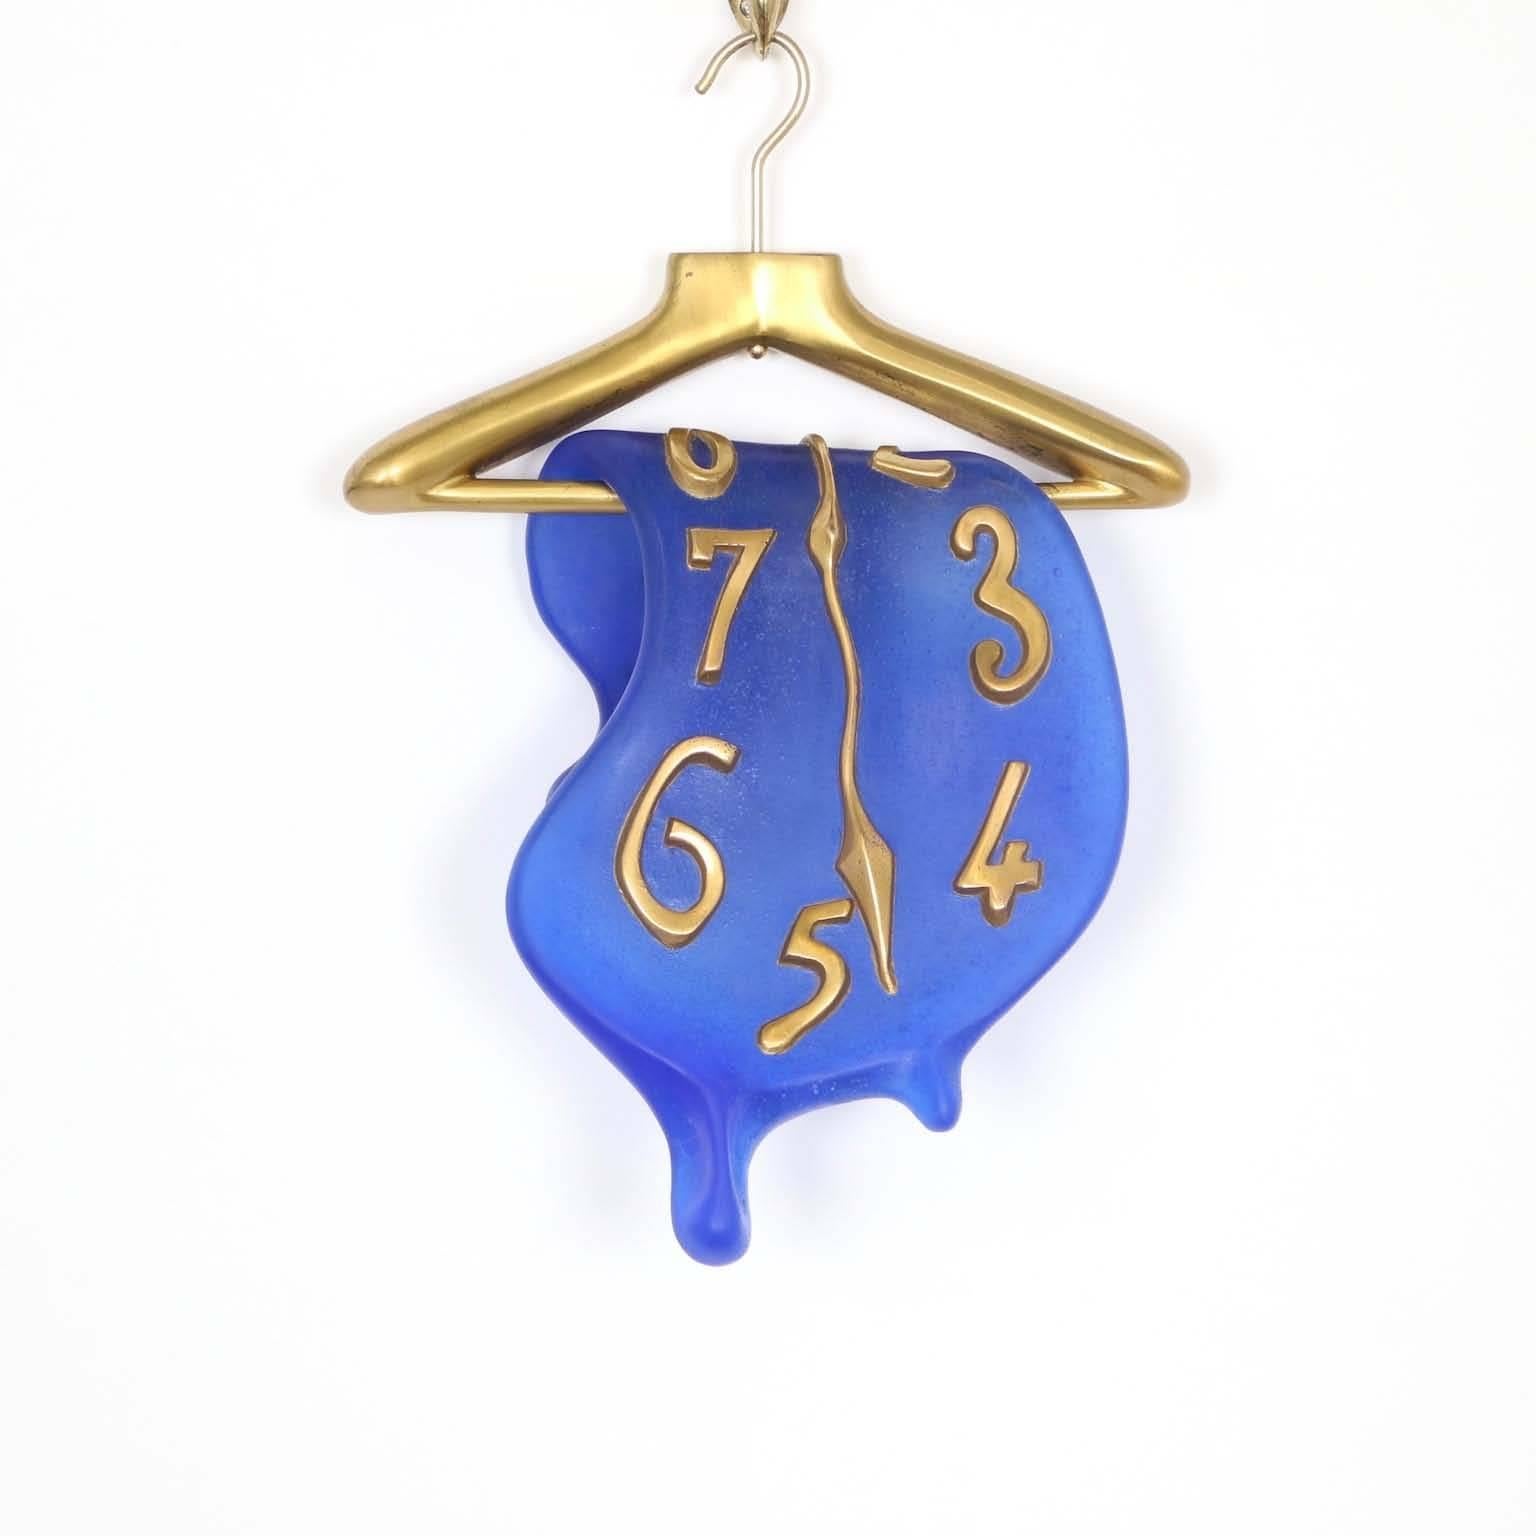 A limited edition wall sculpture designed by Salvador Dali (1904-1989) and produced by Daum, as part of the collaboration between the artist and the French art glass company, lasting from 1968 until 1984. Recreating Dali’s melting clock in blue